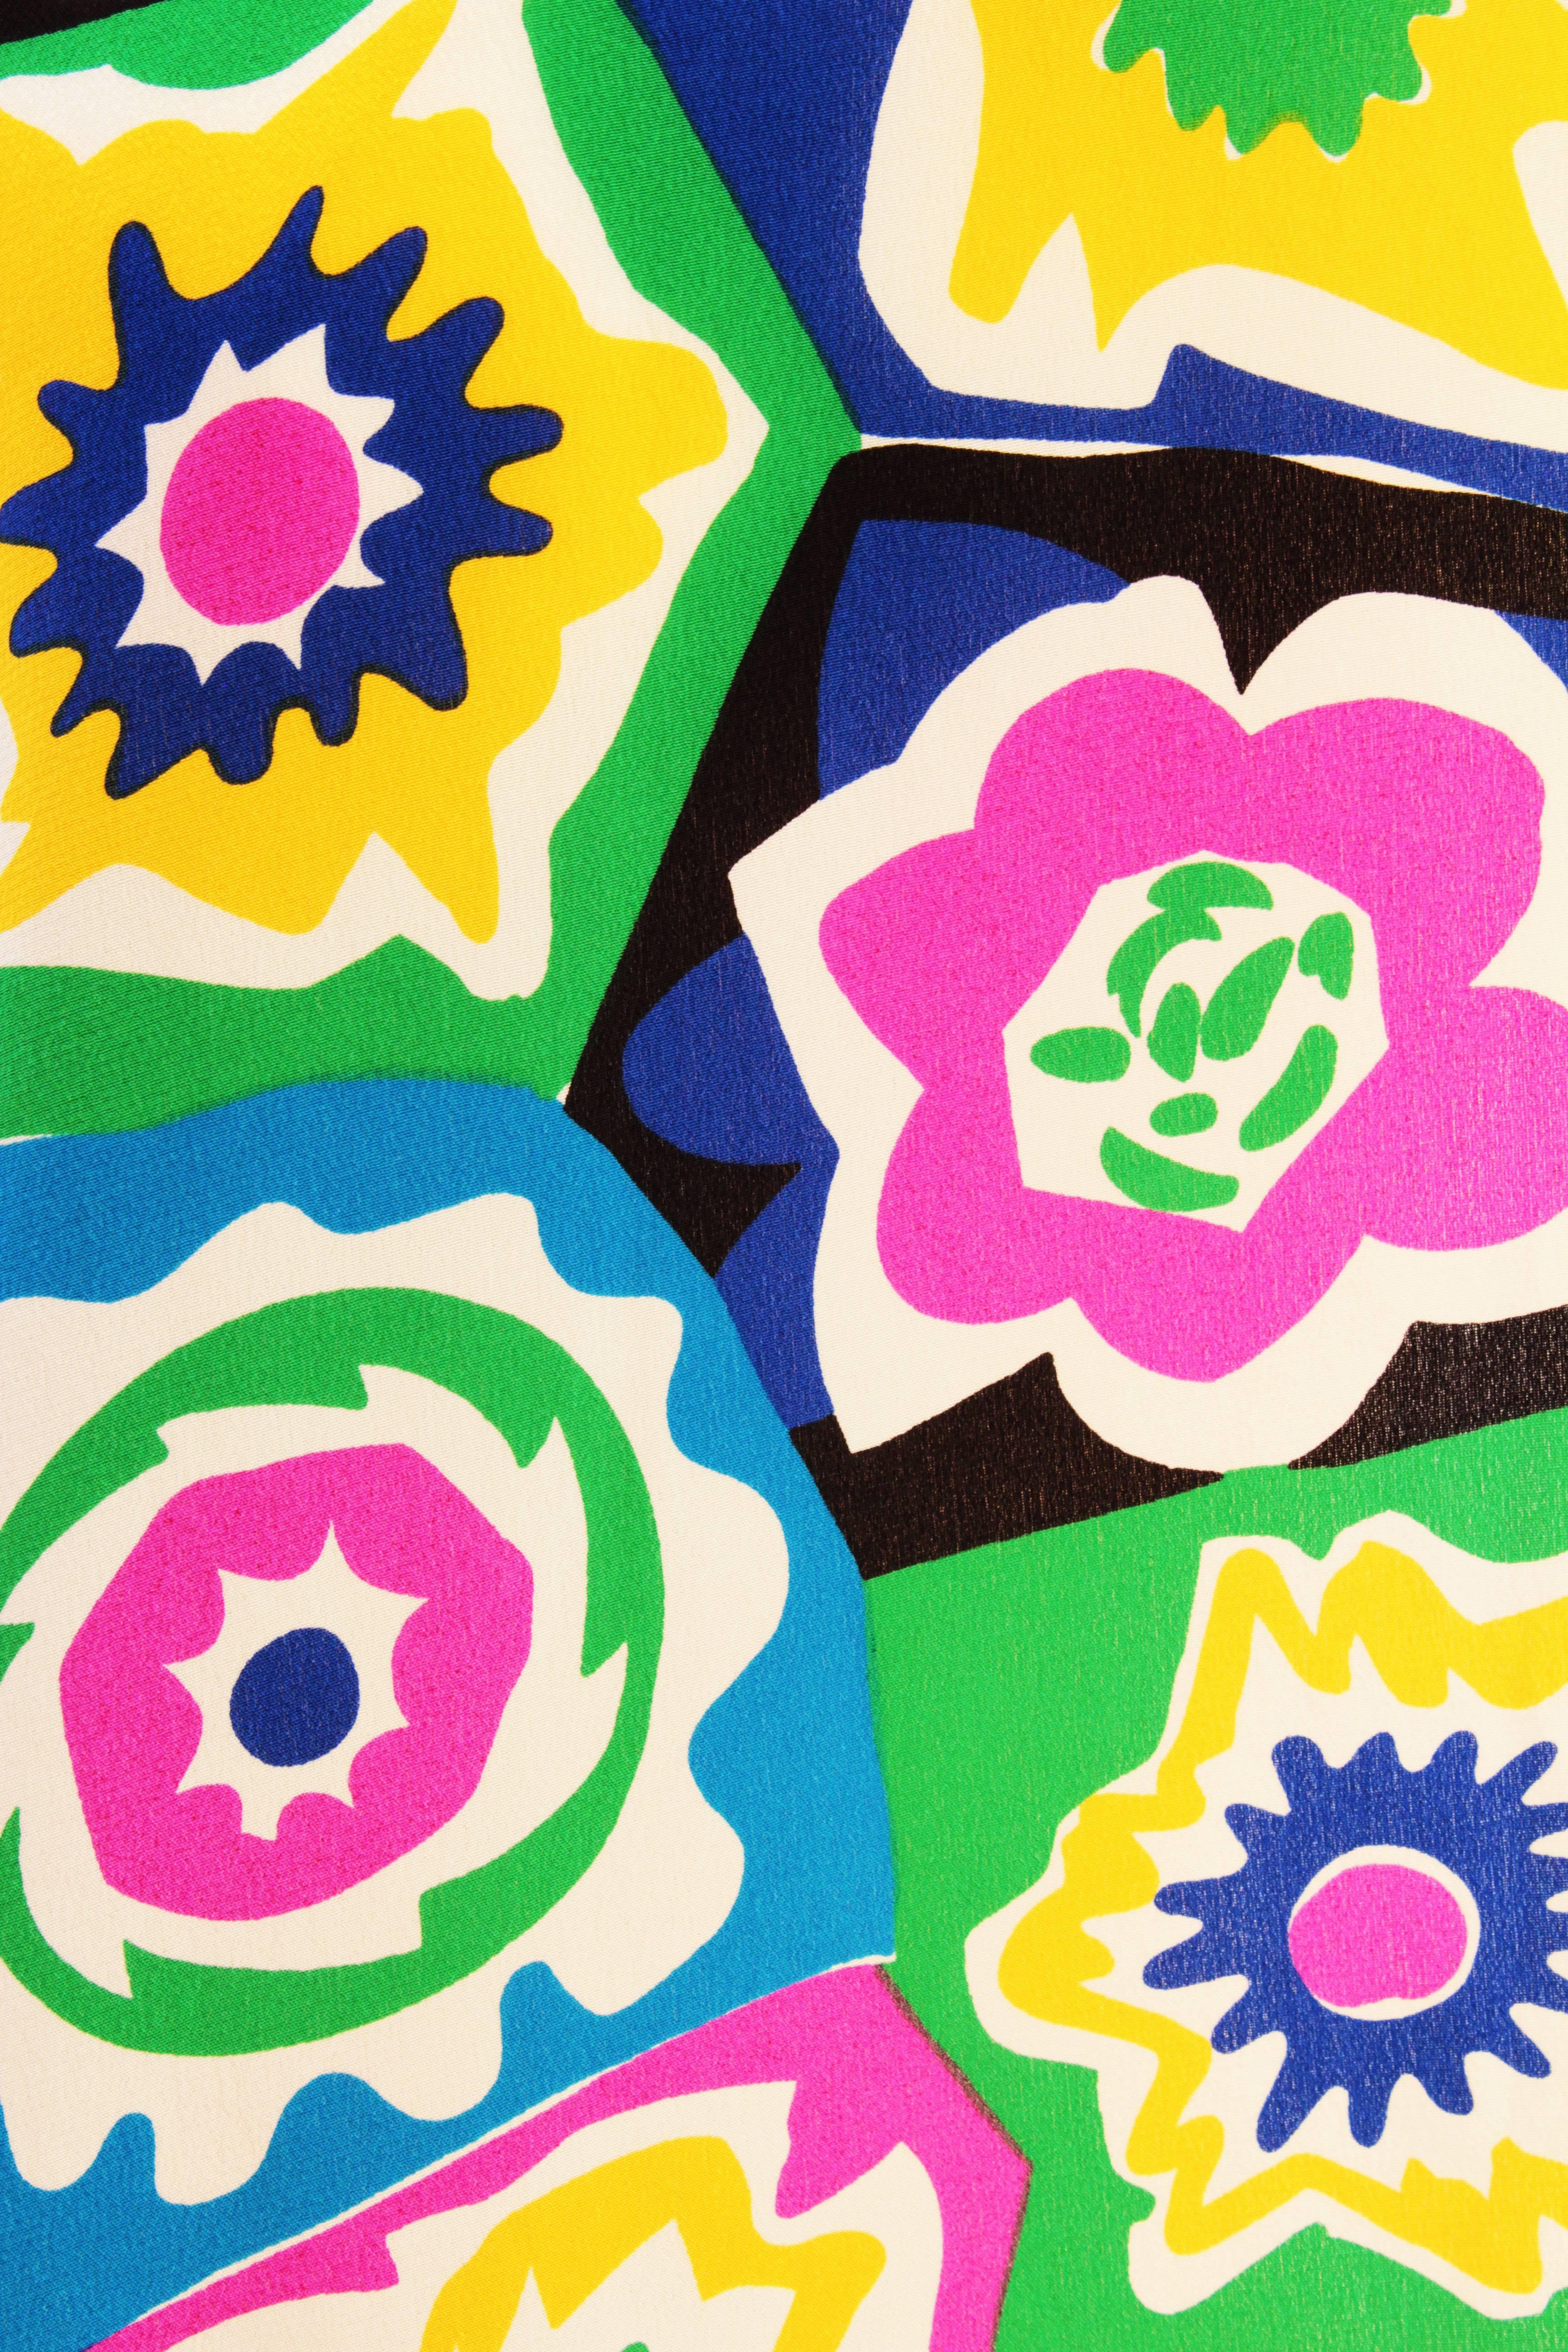 Missoni Silk Scarf with Colorful Pop Art Flowers 62in x 12in Rare Print 1990s  1